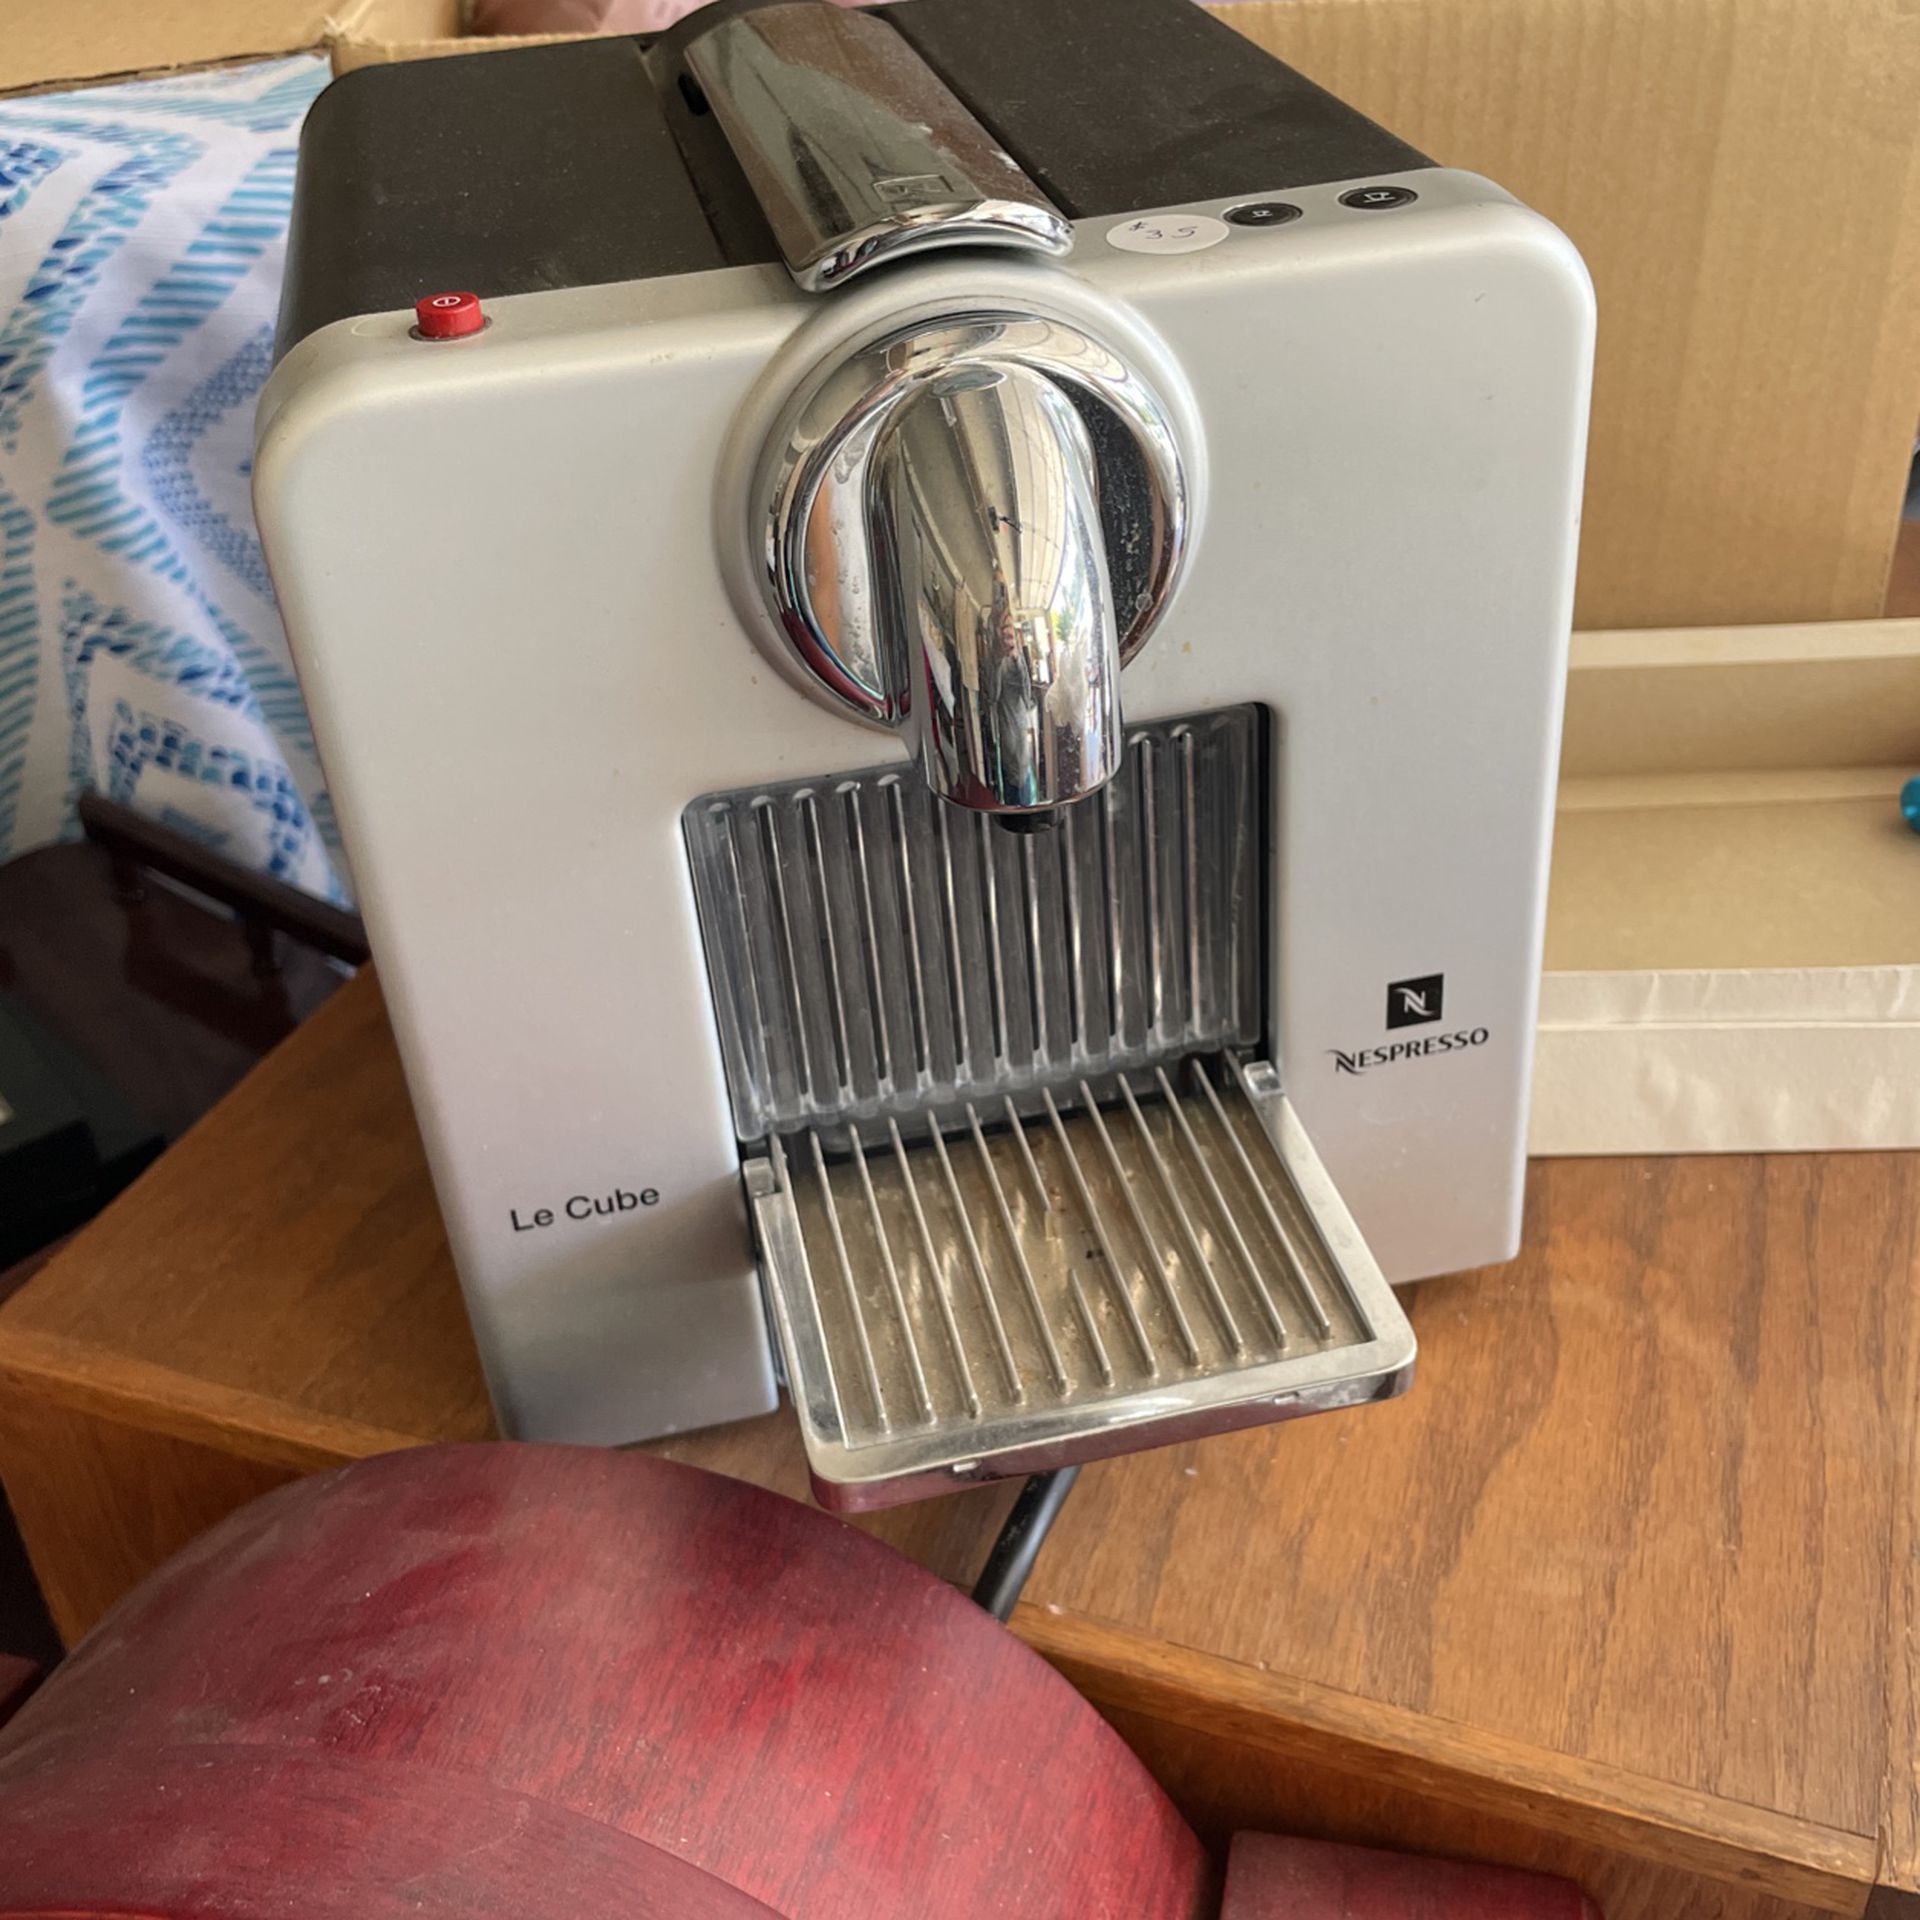 Mr. Coffee Iced Tea Maker for Sale in Piedmont, CA - OfferUp